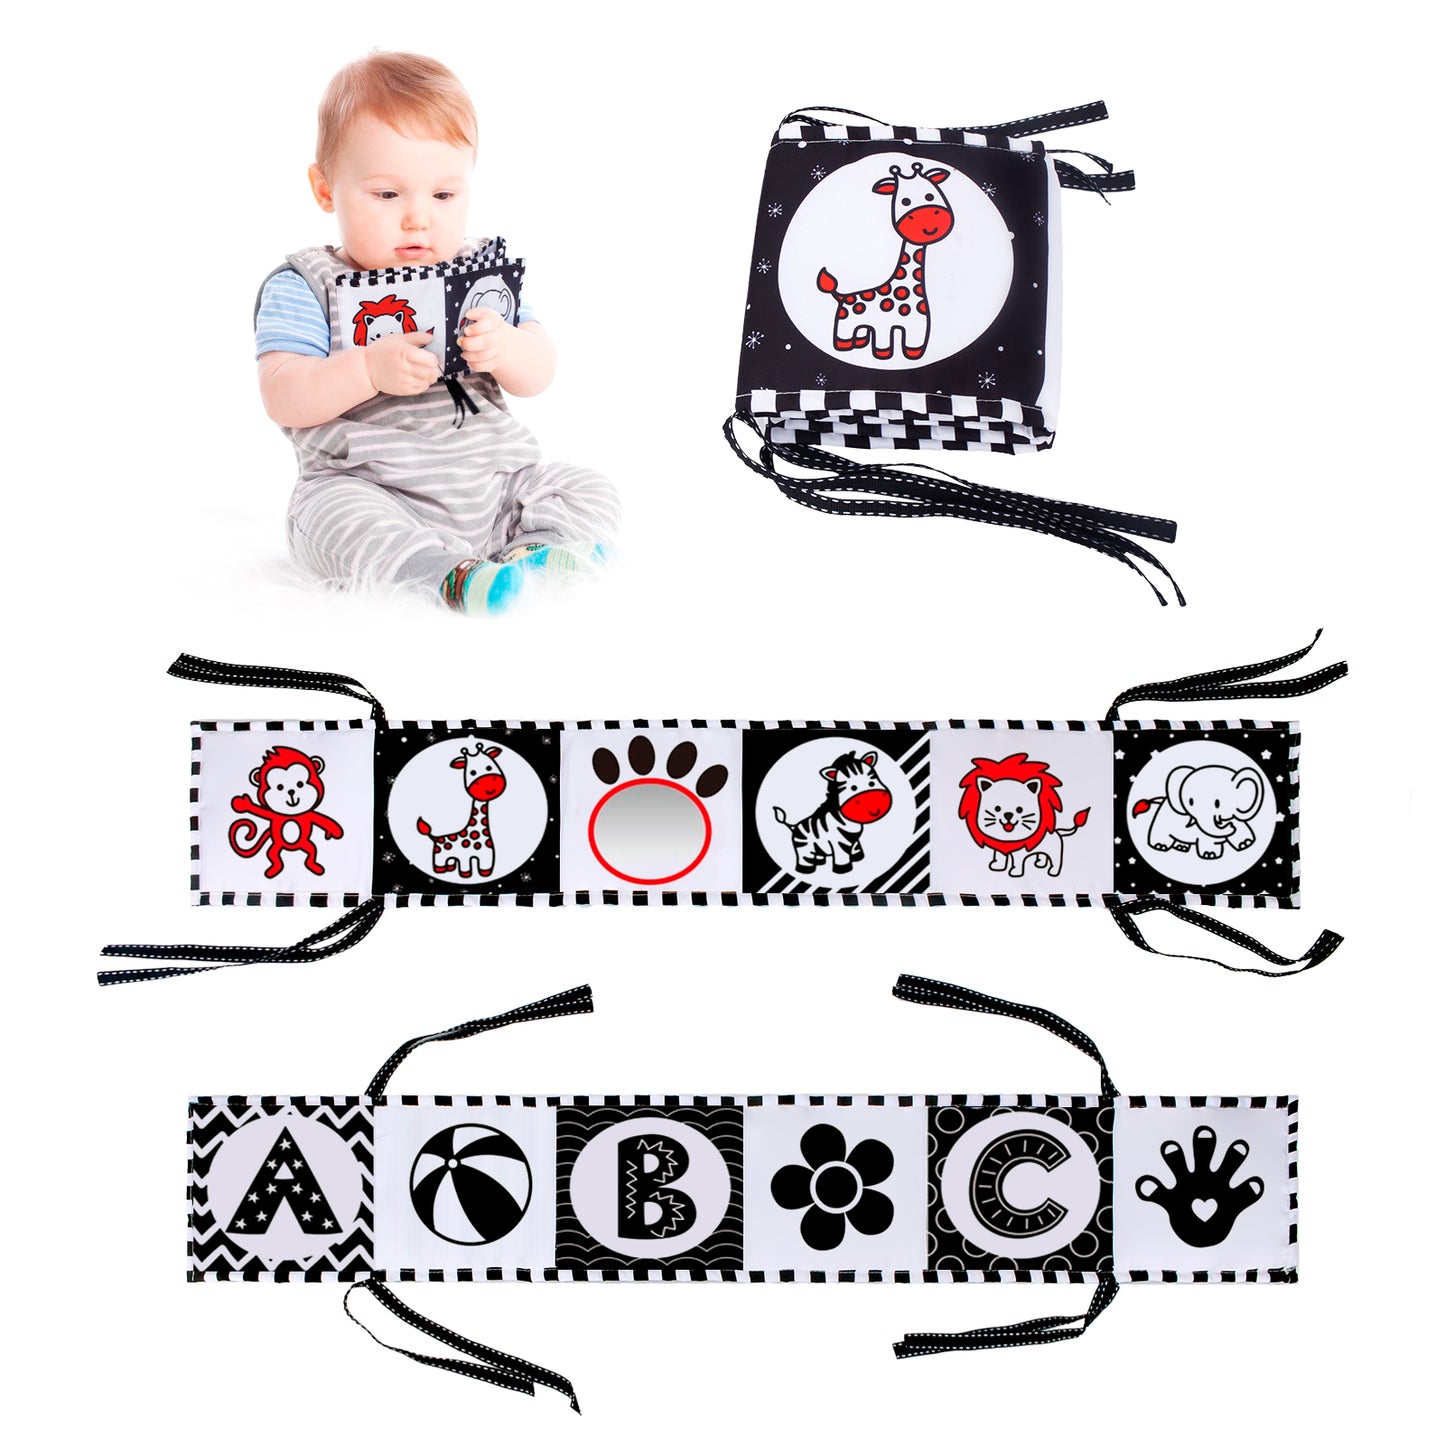 Jenilily Black and White Soft Cloth Book for Baby Infant Mirror Tummy Time Baby High Contrast Book Crib Toys for 0-3-6 Months Boys Girls Newborn